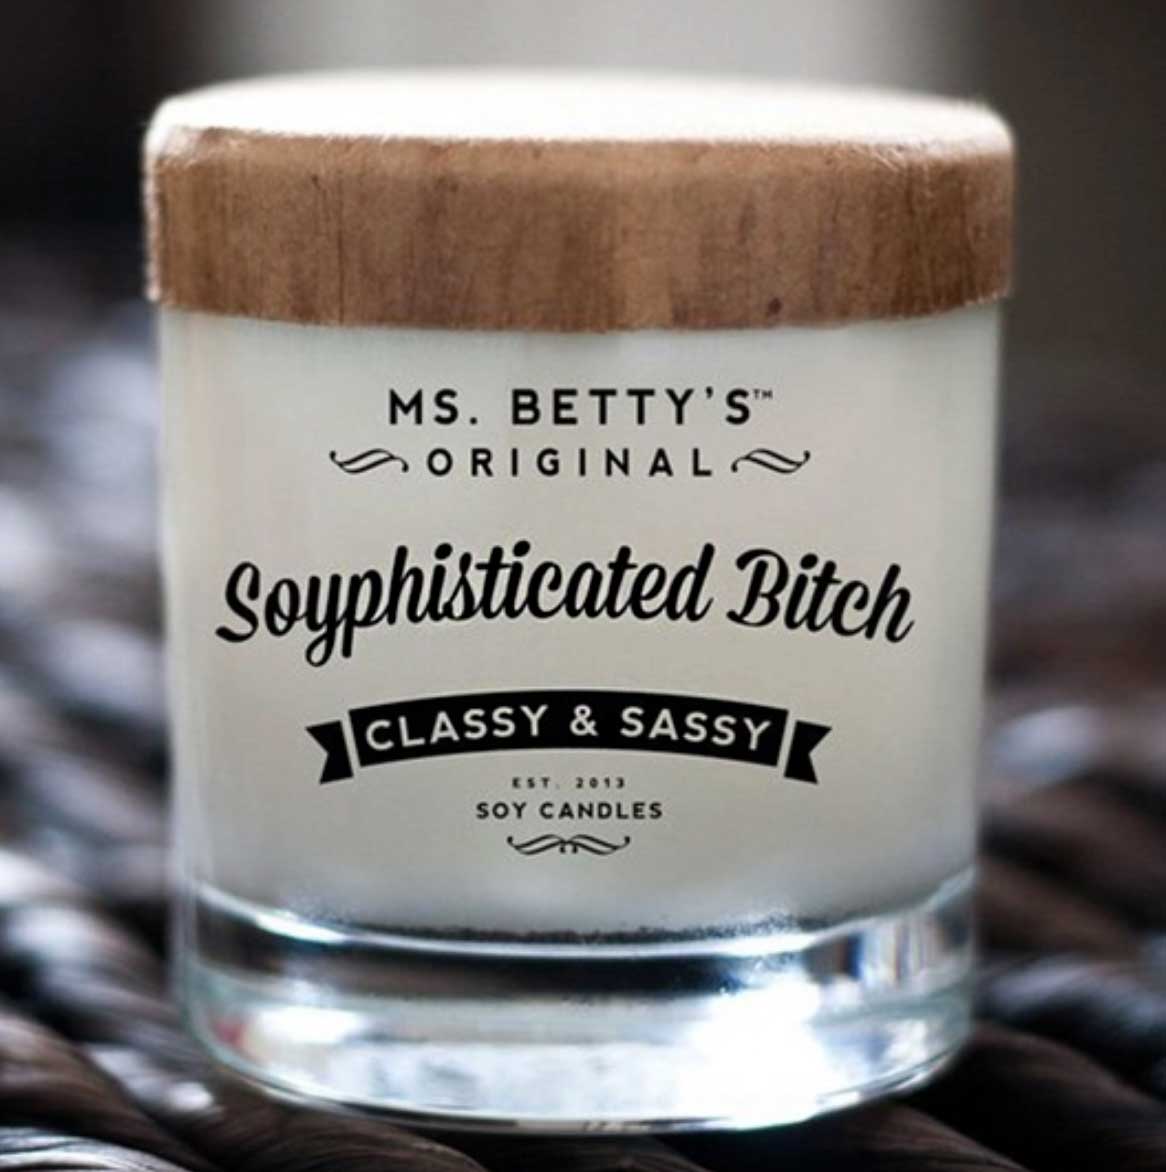 Ms. Betty's Original Soy Candles, Soyphisticated Bitch - Classy & Sassy